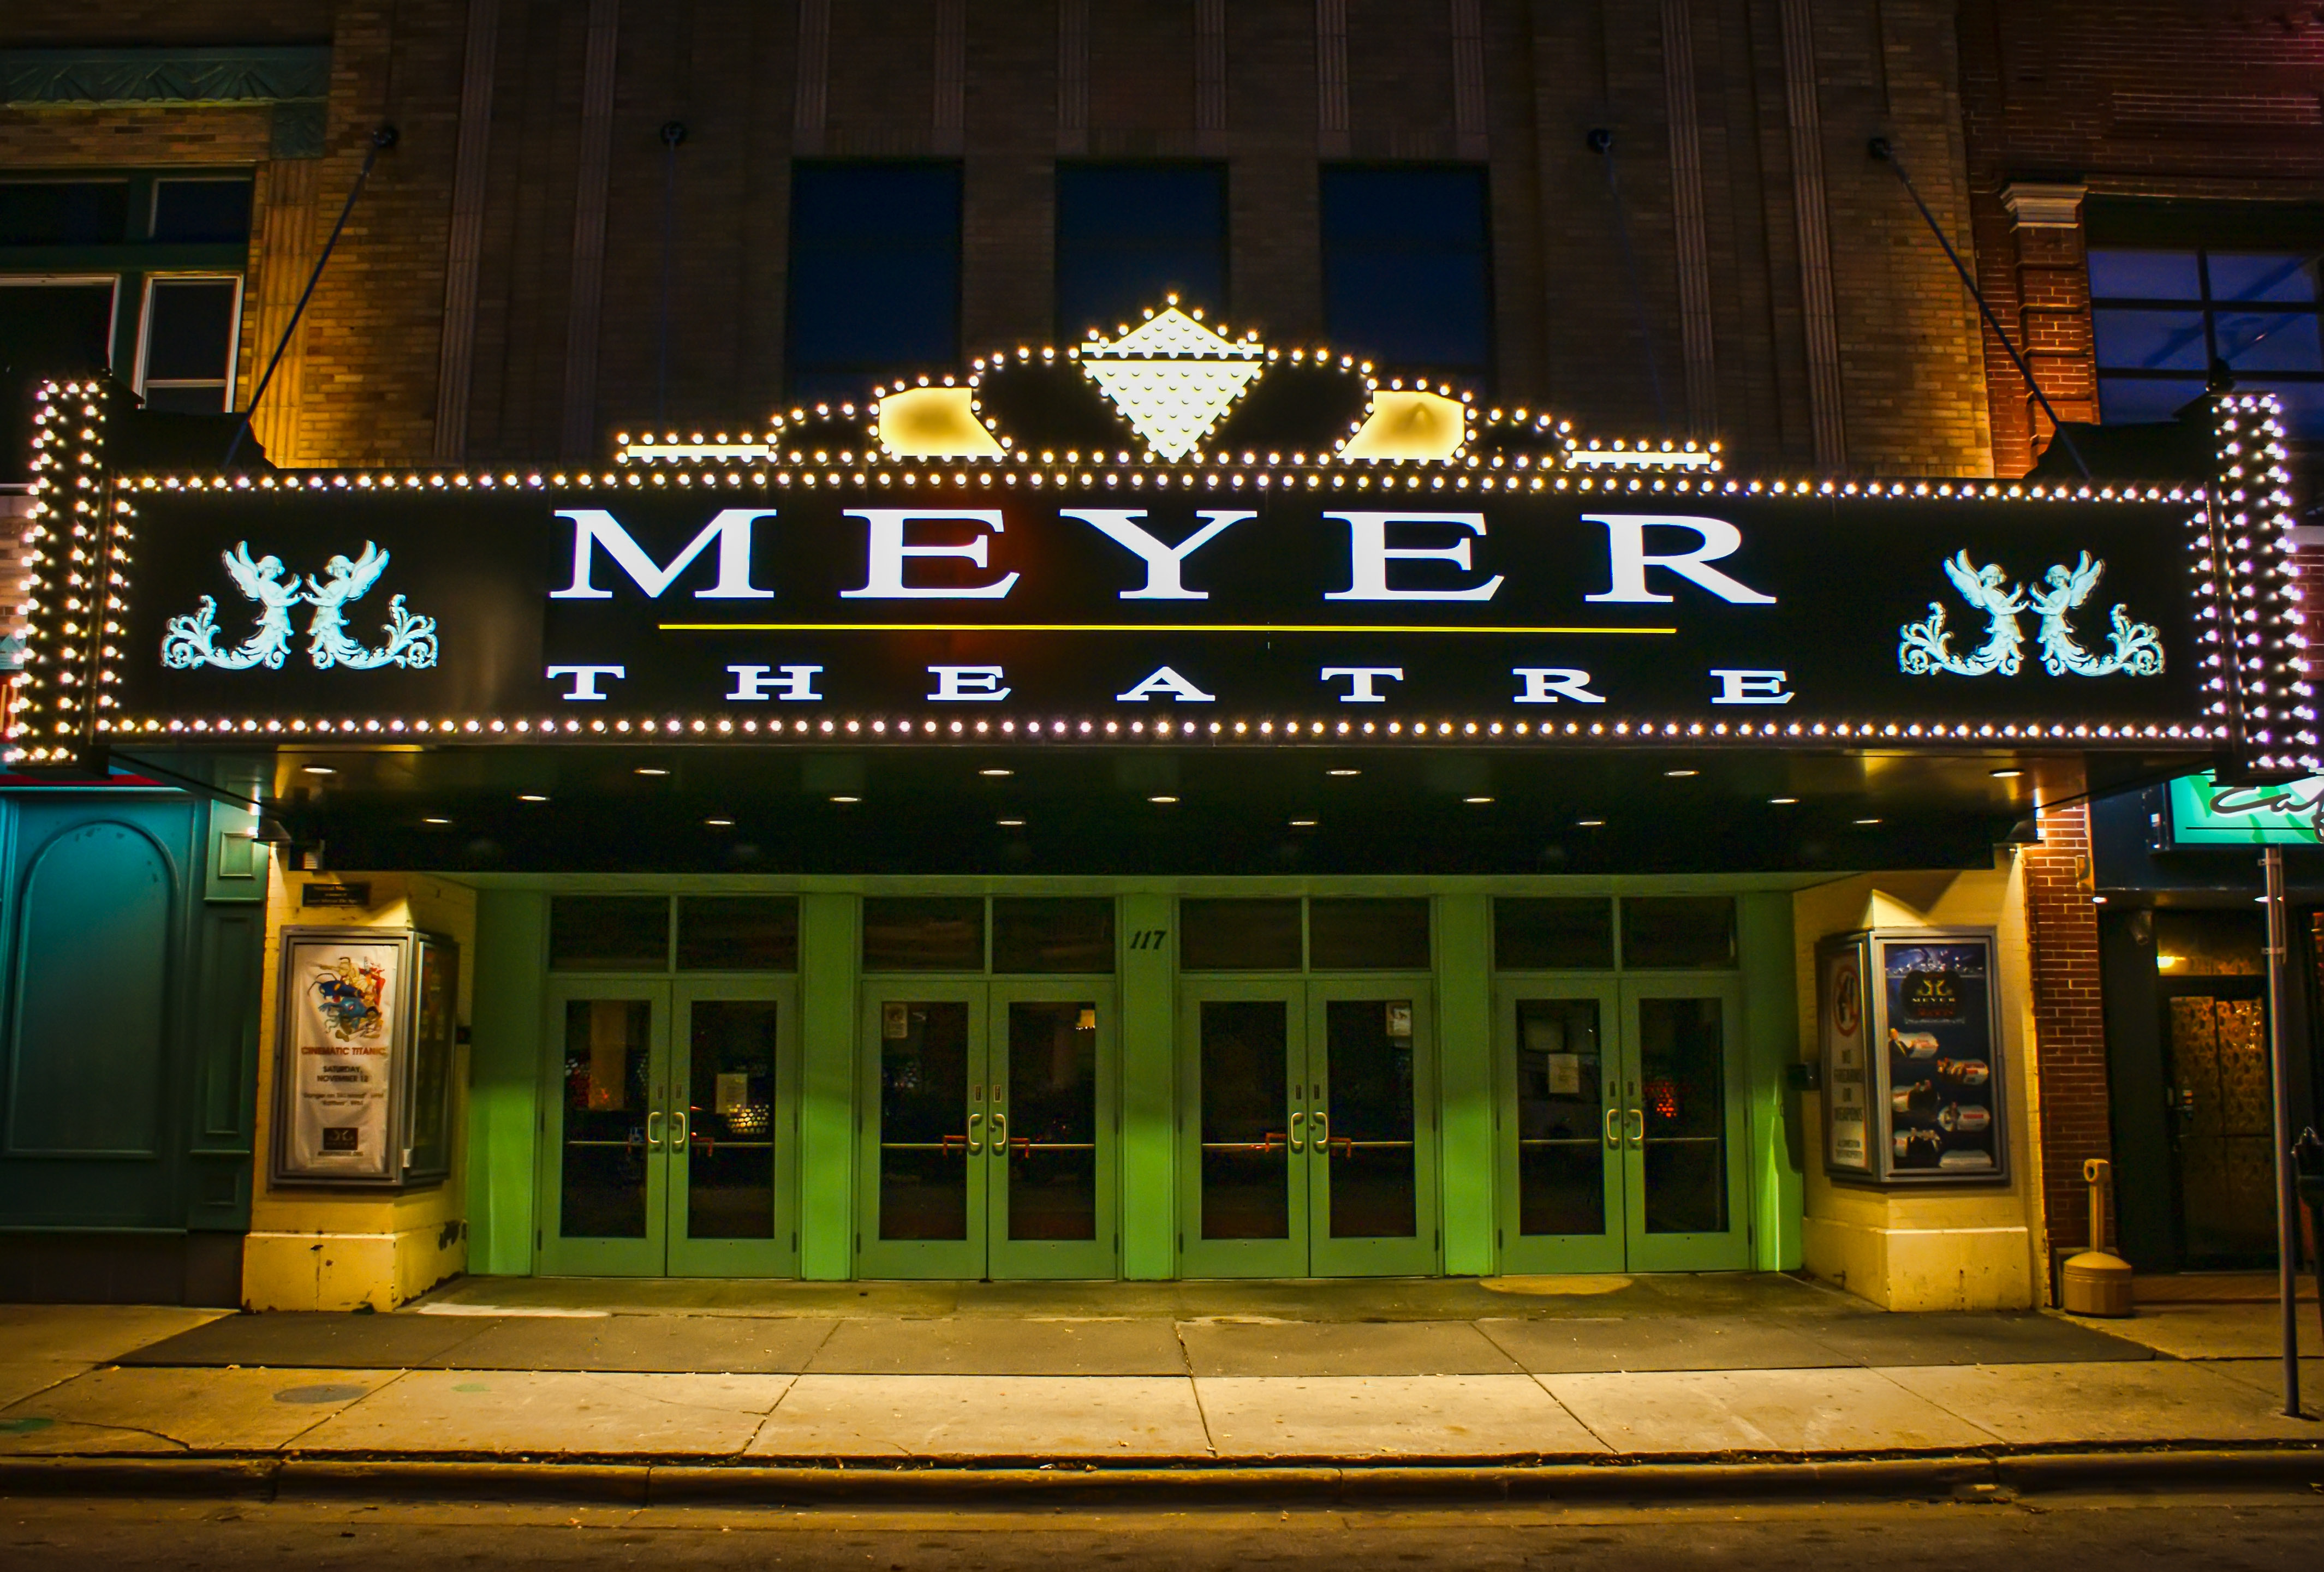 Historic Meyer Theater in Green Bay Wisconsin